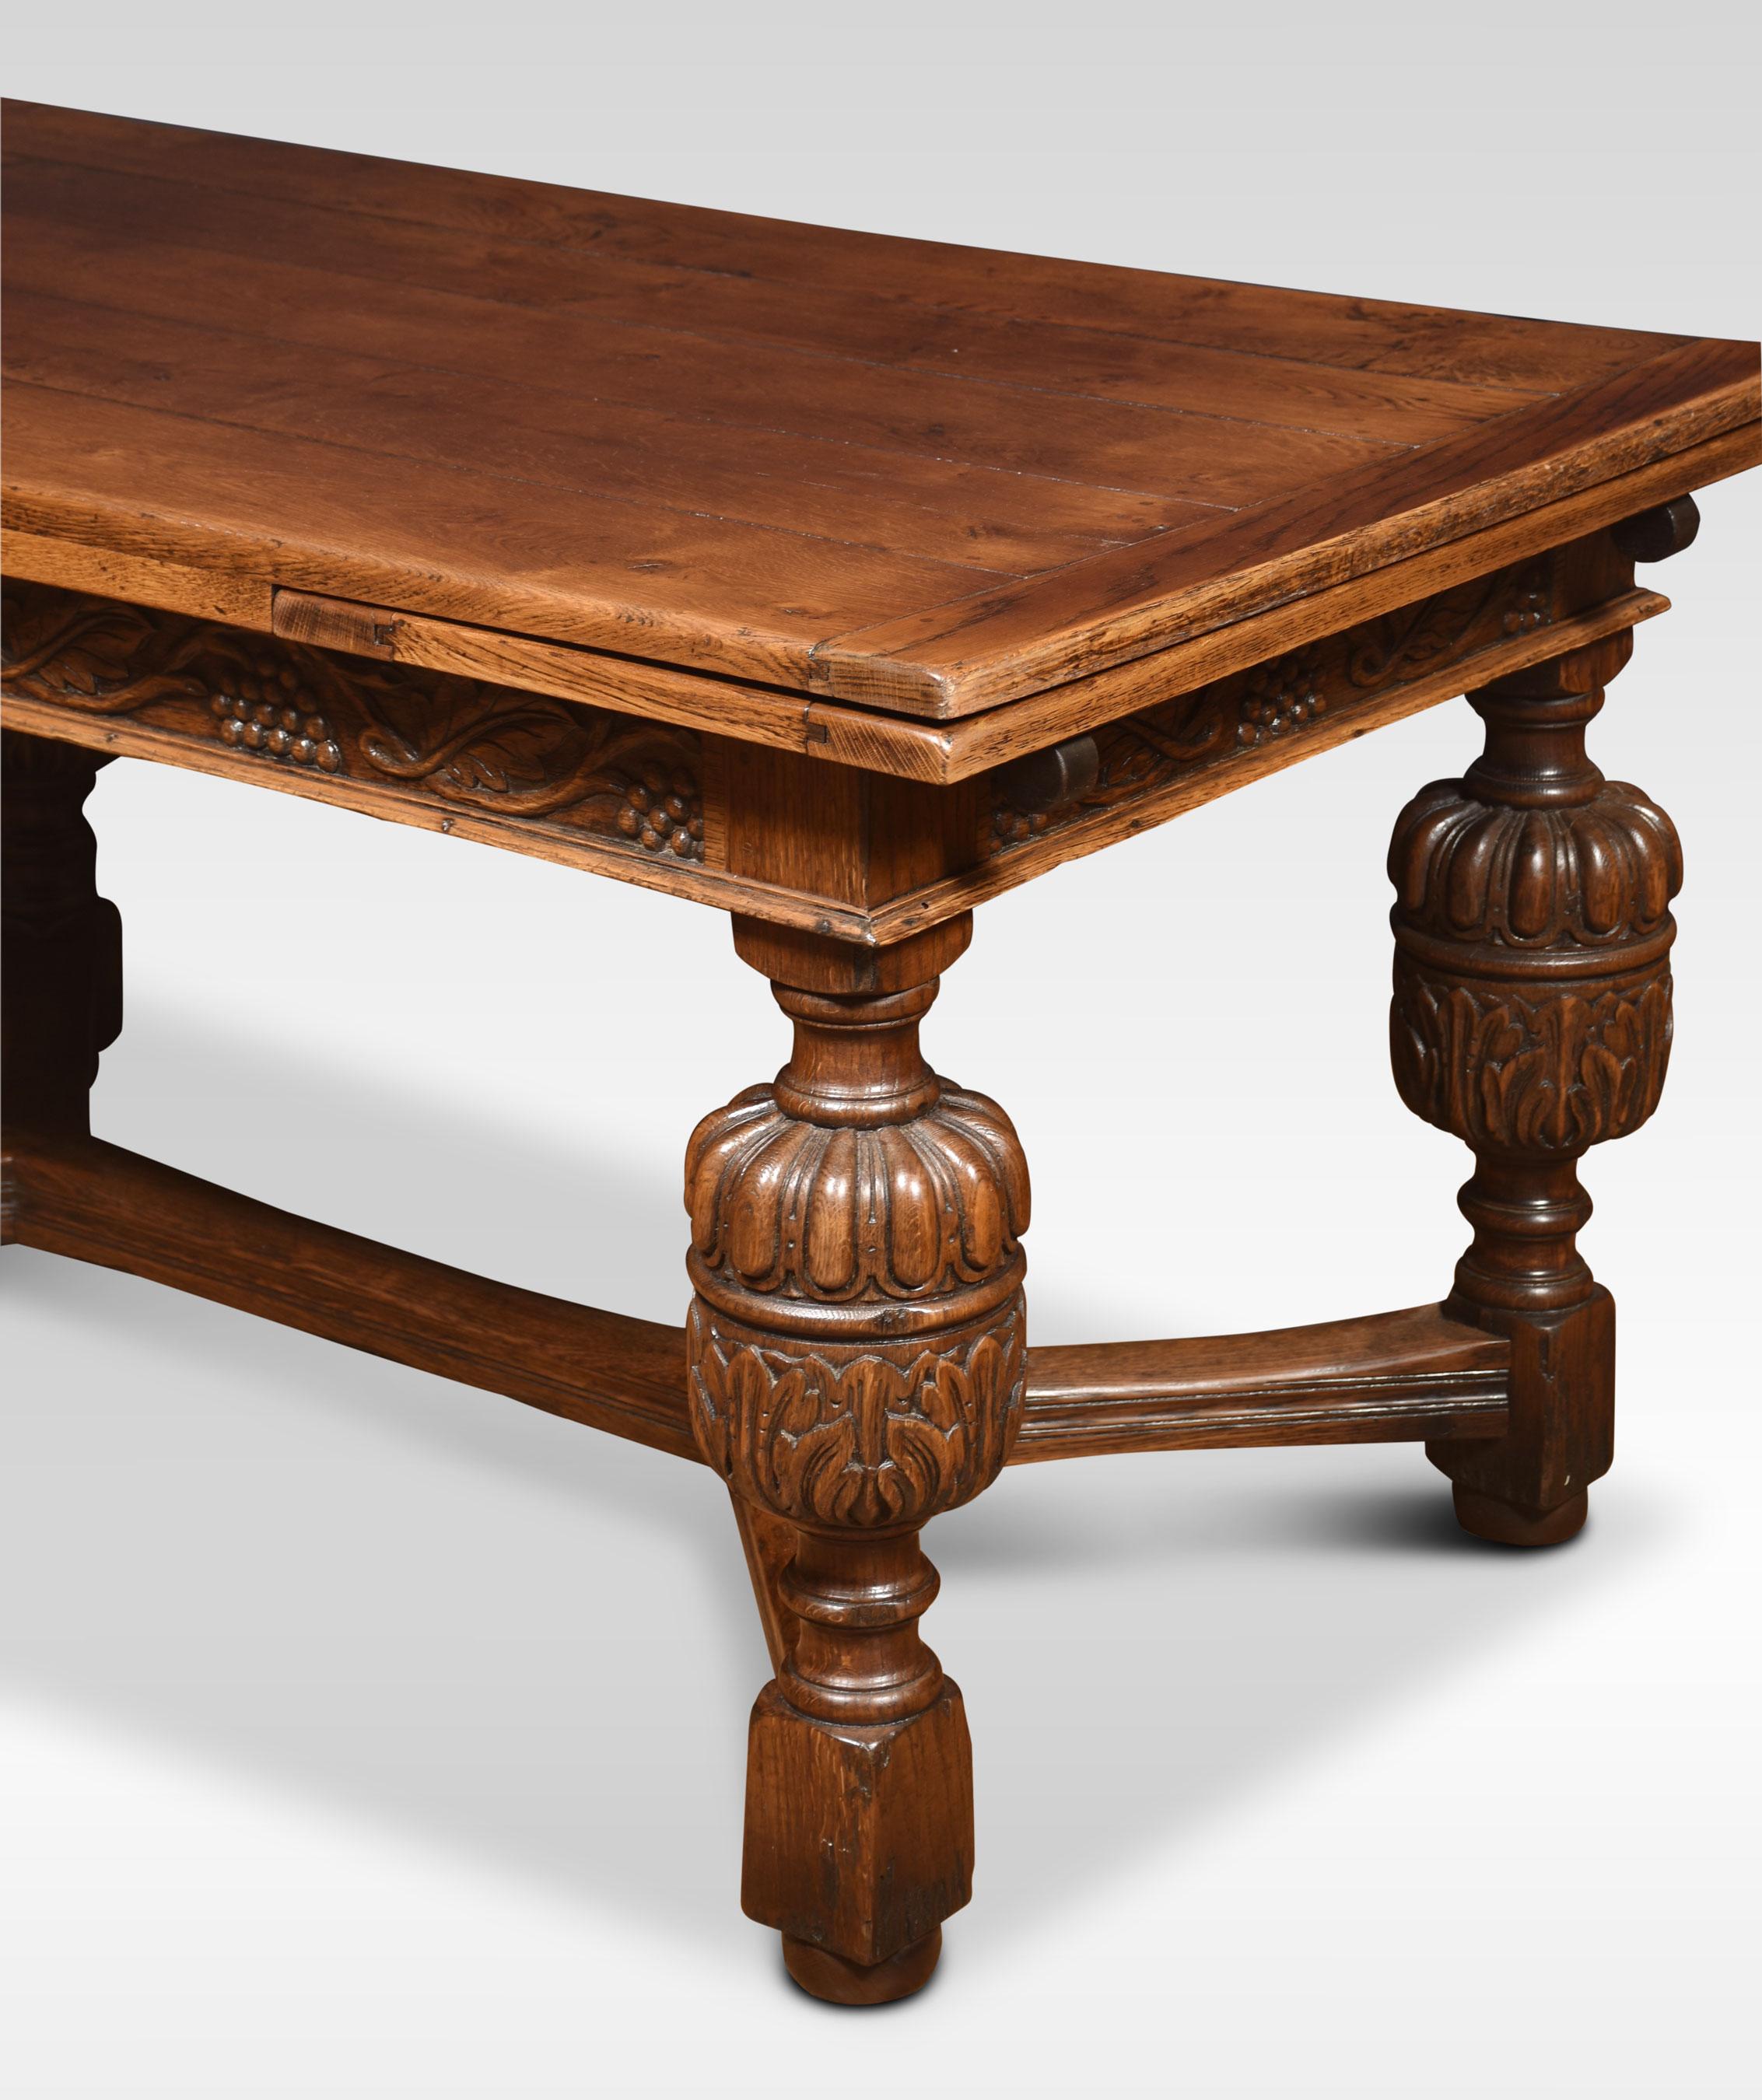 An impressive Elizabethan style oak draw-leaf table. The plank top having pull-out leaves to each end above a strap-work frieze with scrolling foliated carving raised on bulbous cup & cover legs leading down to block feet united by